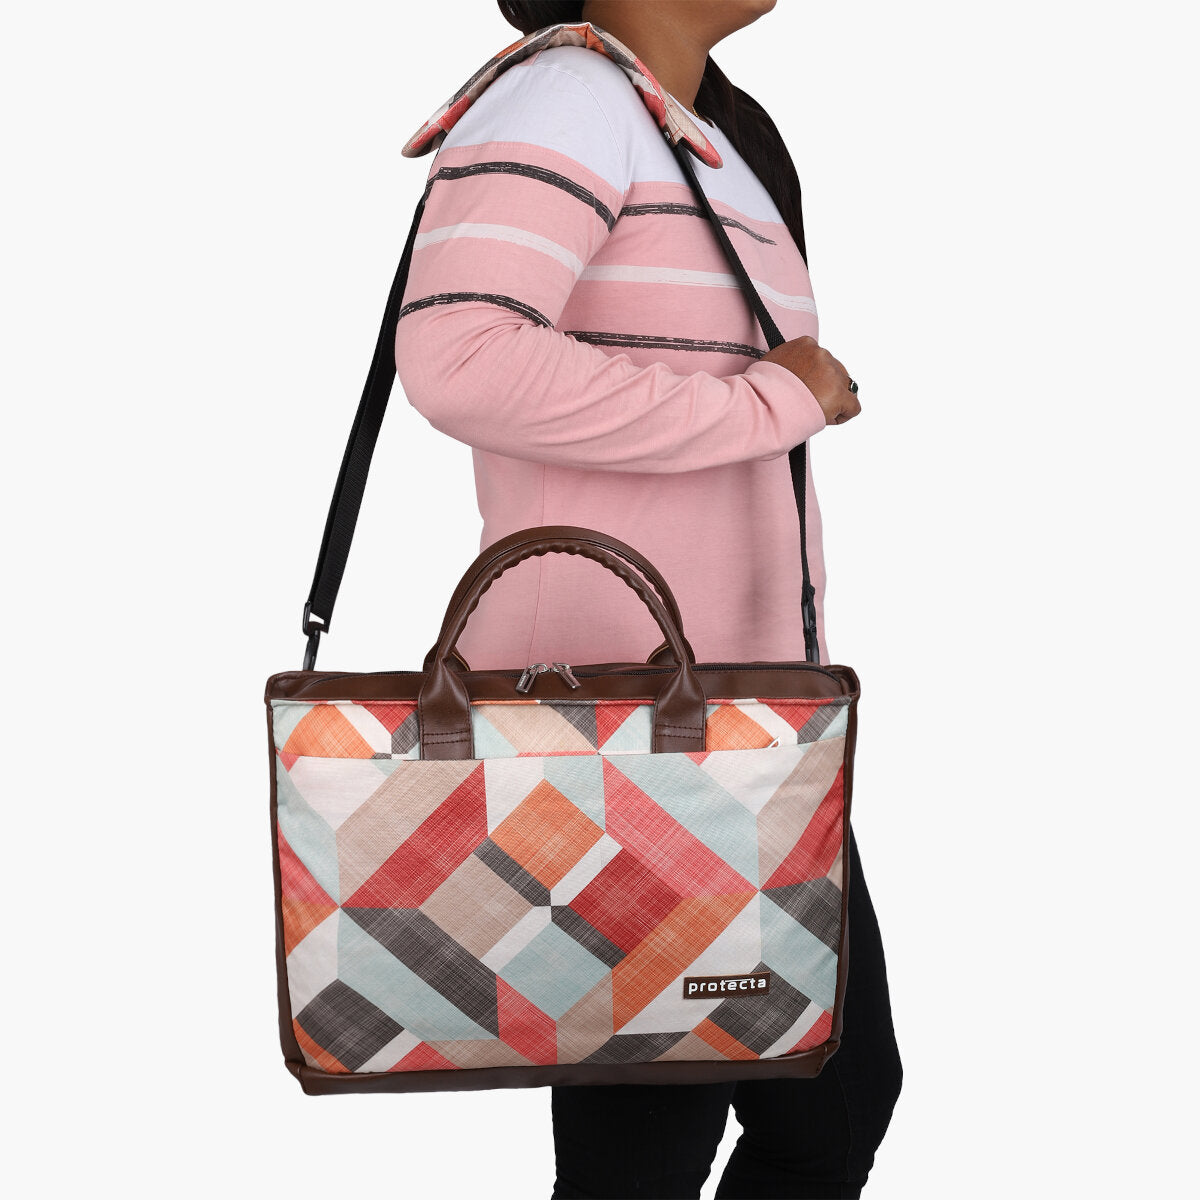 Geometric Print | Protecta Evenly Poised Office Laptop Bag for Women - 7